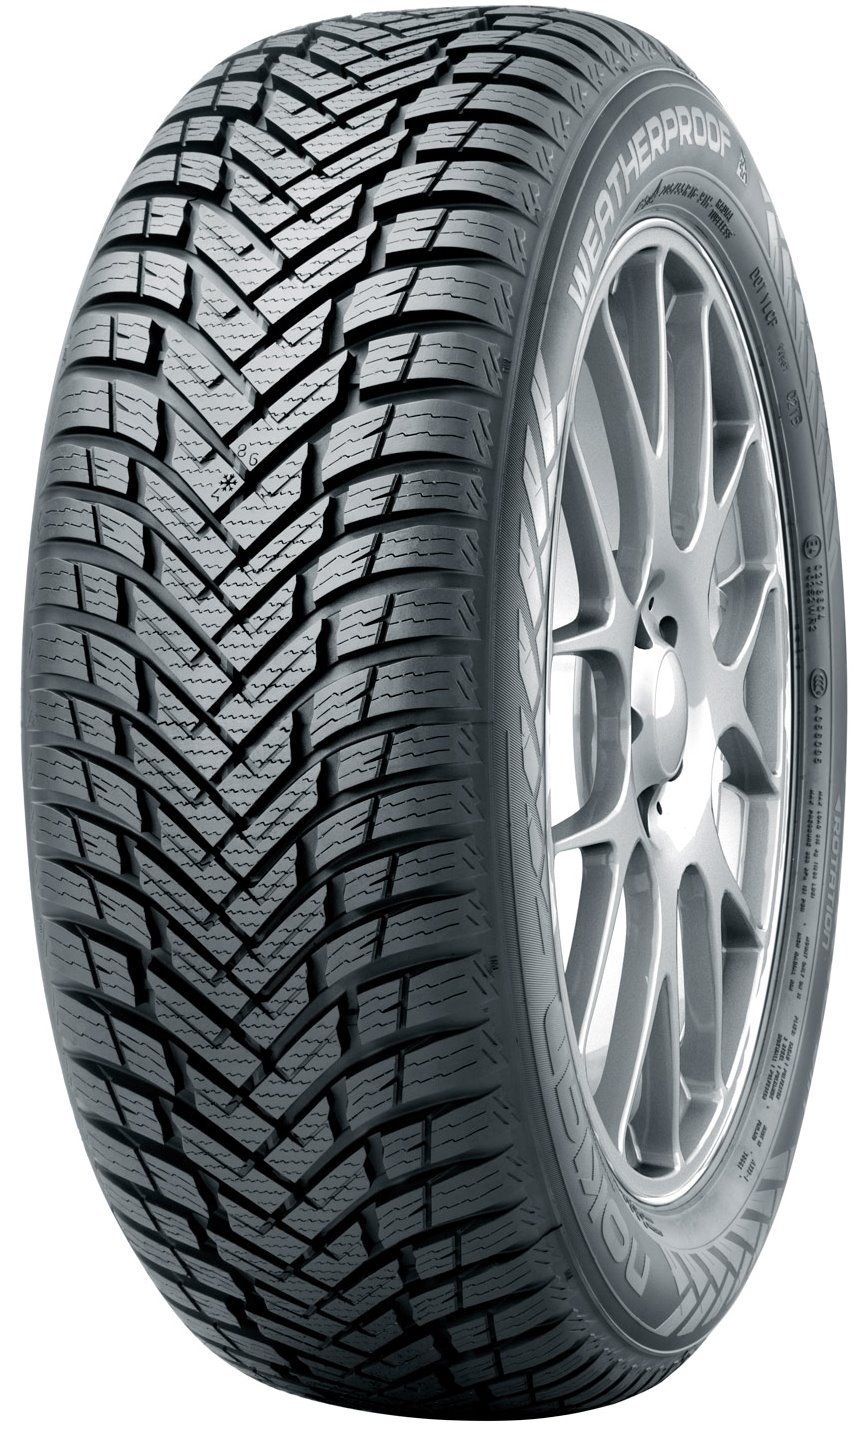 Nokian WeatherProof - Tyre Tests and Reviews